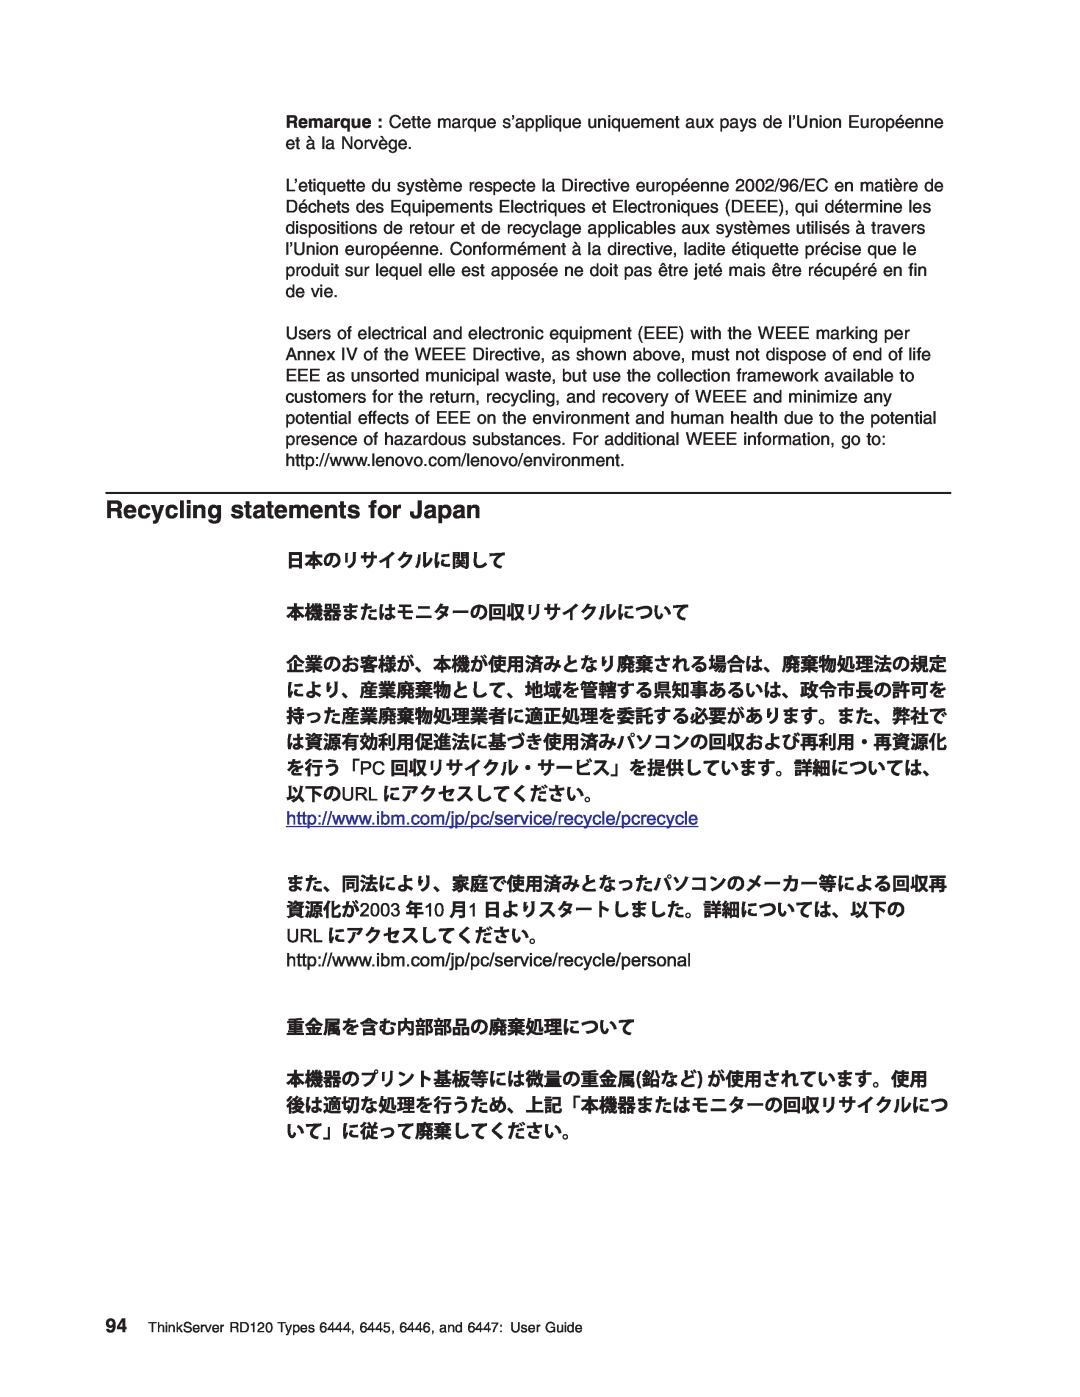 Lenovo RD120 manual Recycling statements for Japan 